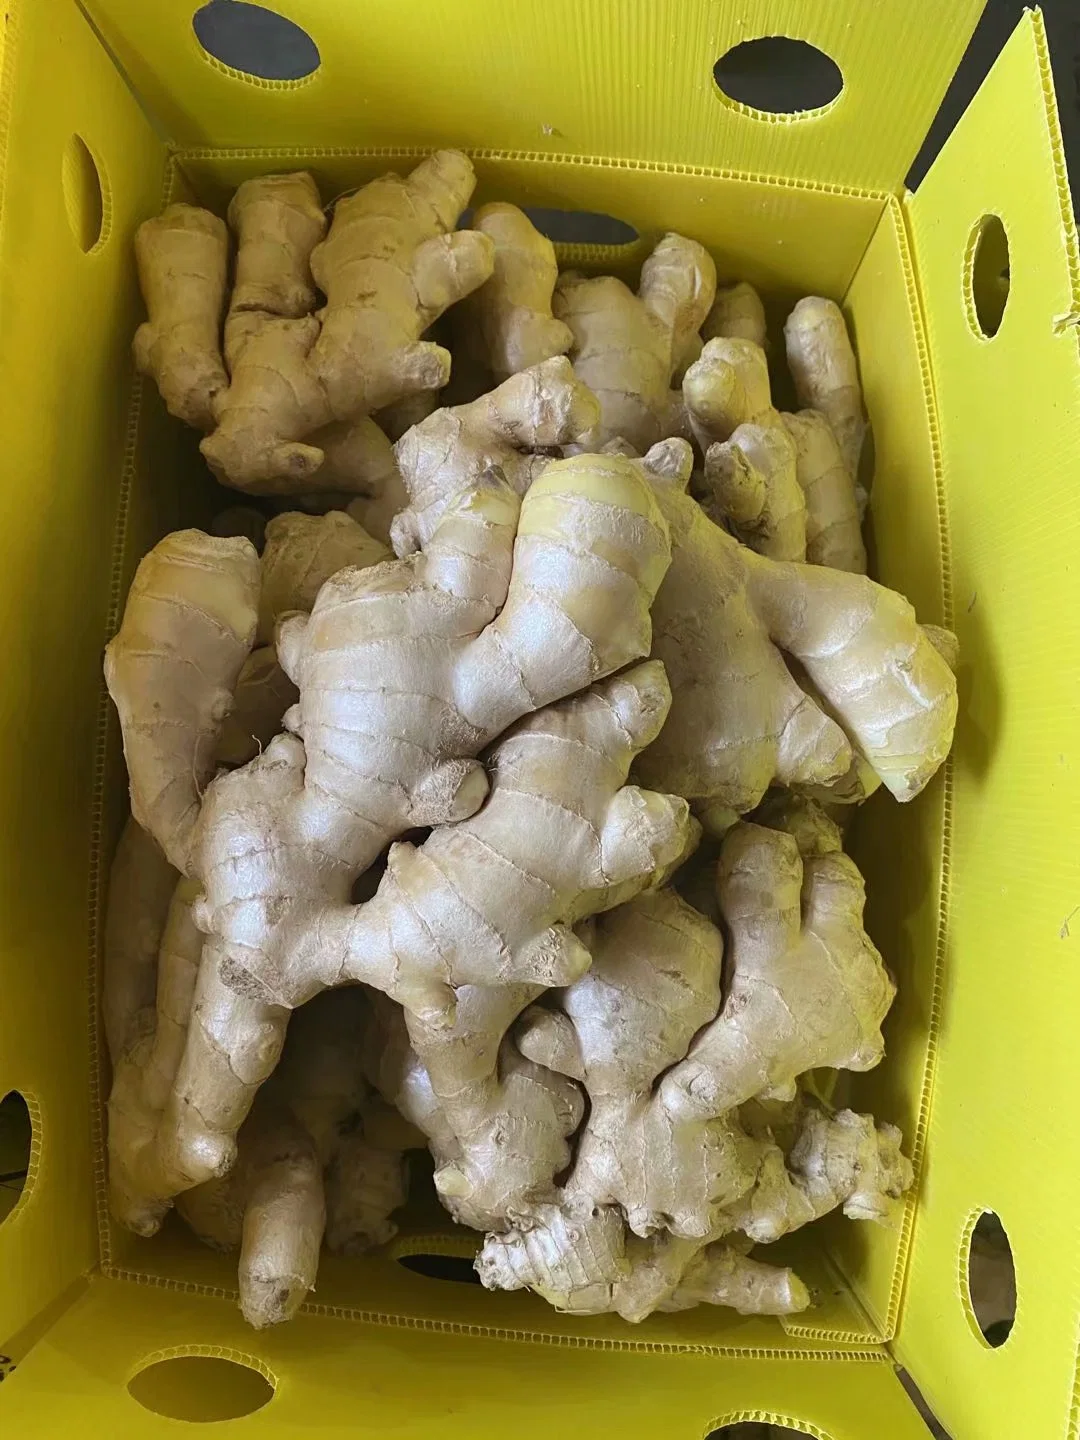 Fresh Spicy Mature Ginger Sold Directly From The Factory